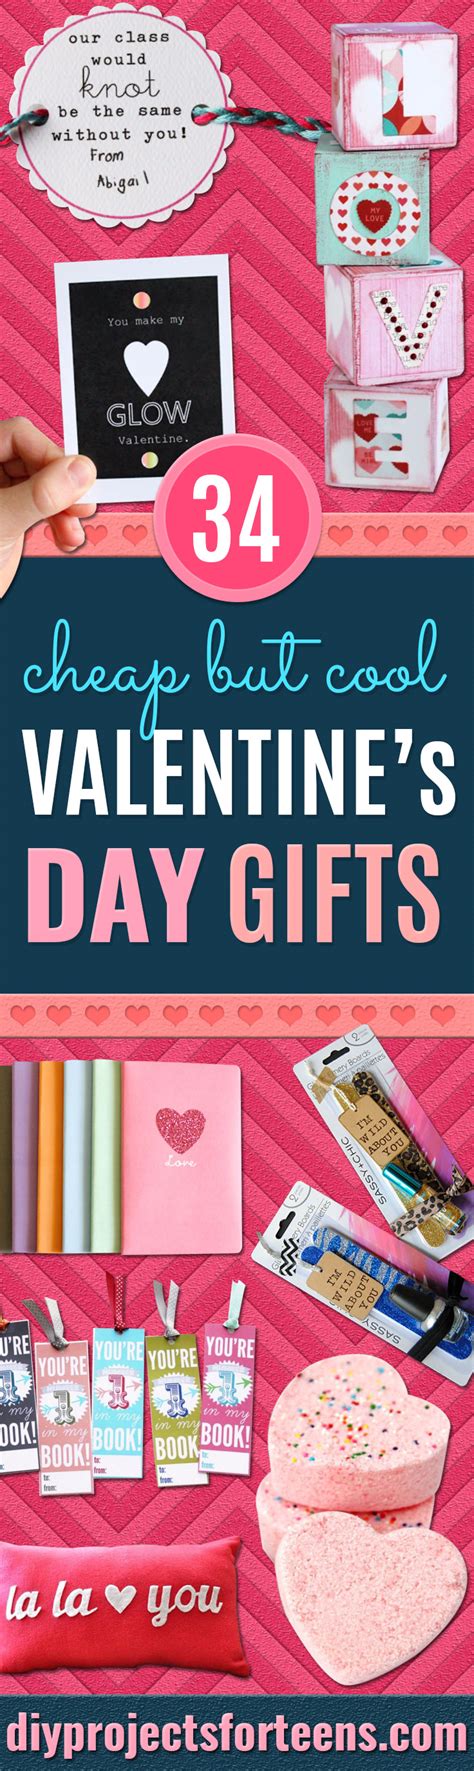 Diy Best Friend Valentines Day Gifts Diy Homemade Christmas Gifts Craft Ideas For Christmas